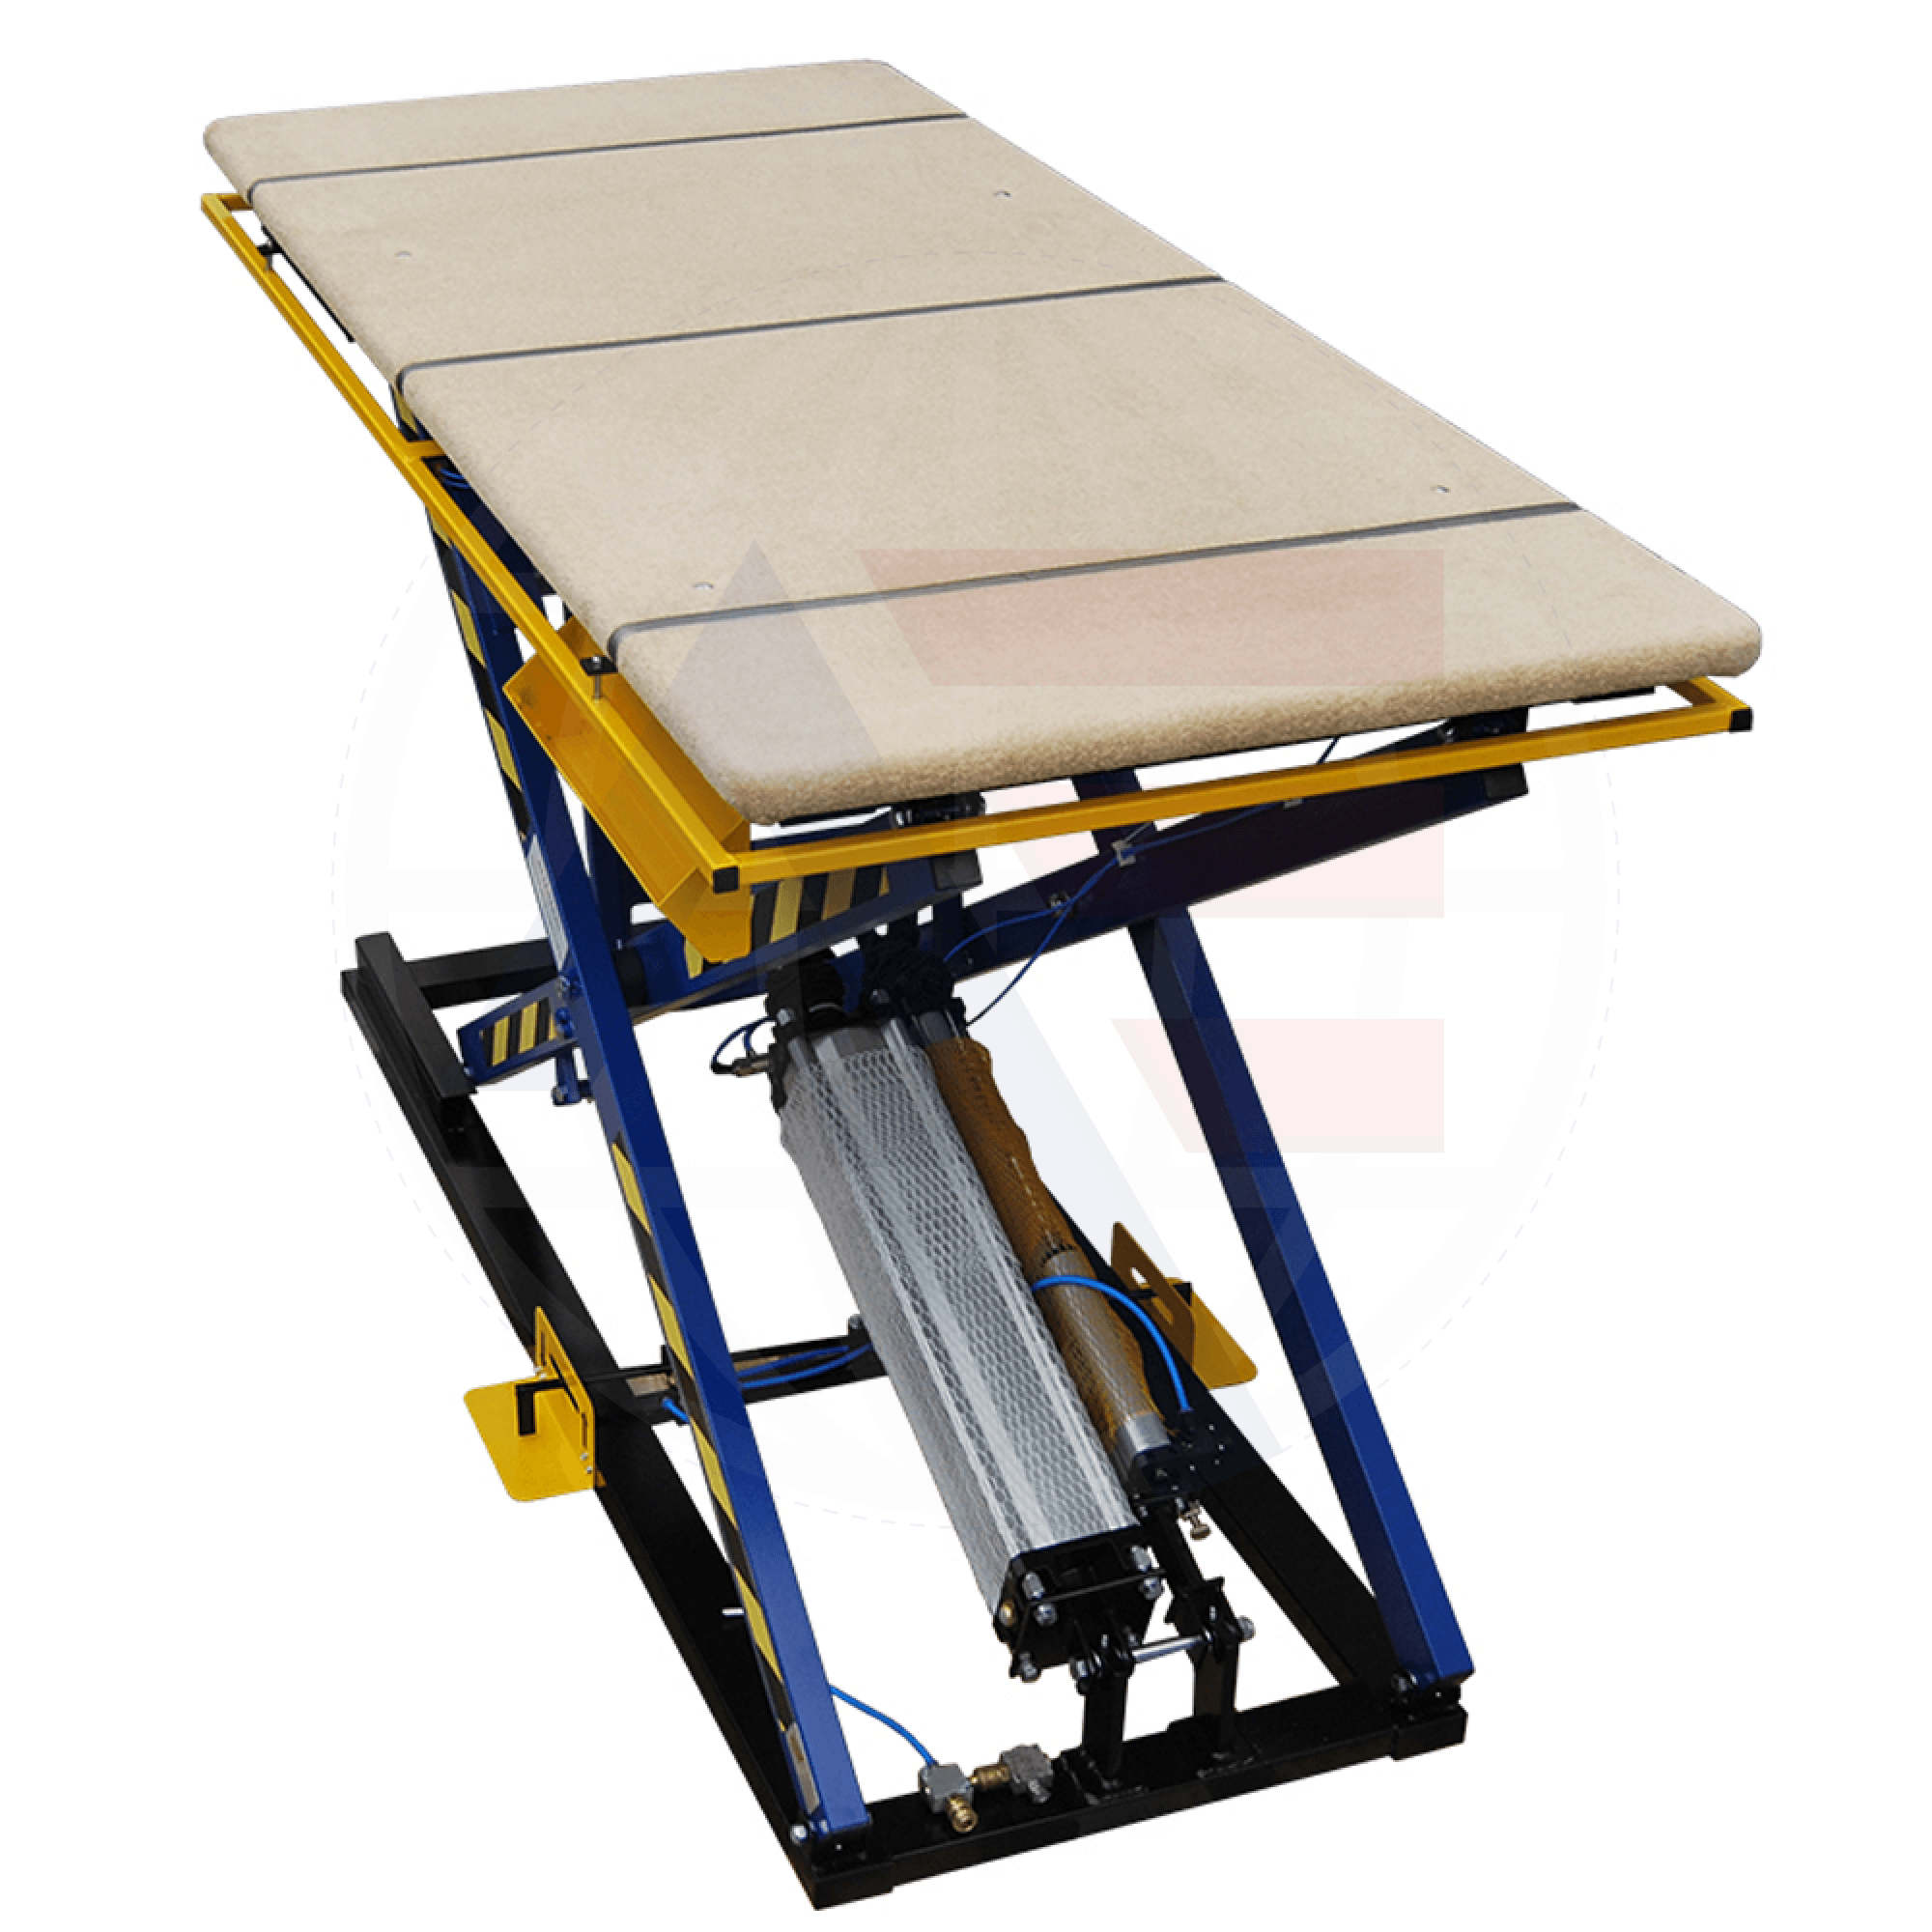 Rexel St-3/Krb Pneumatic Lifting Table Tables